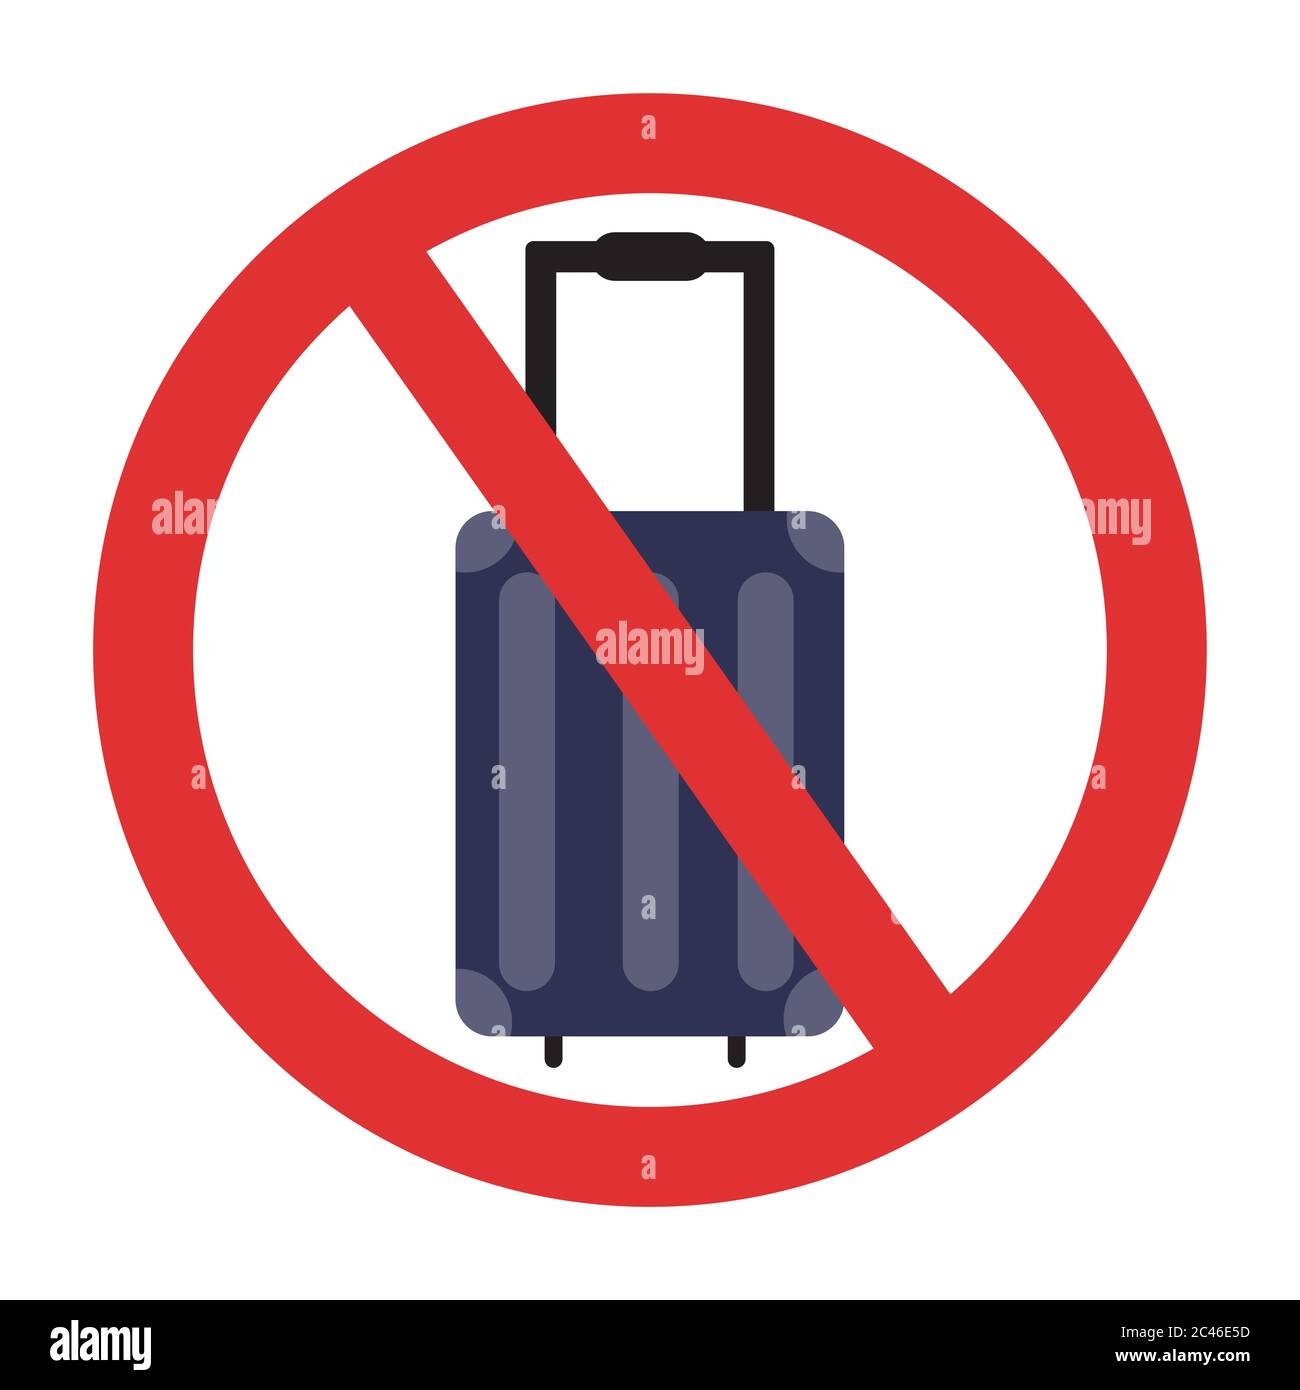 Ban on luggage. Travel ban. Stop travel isolated illustration. Stay home COVID-19 prevention. Stock Vector